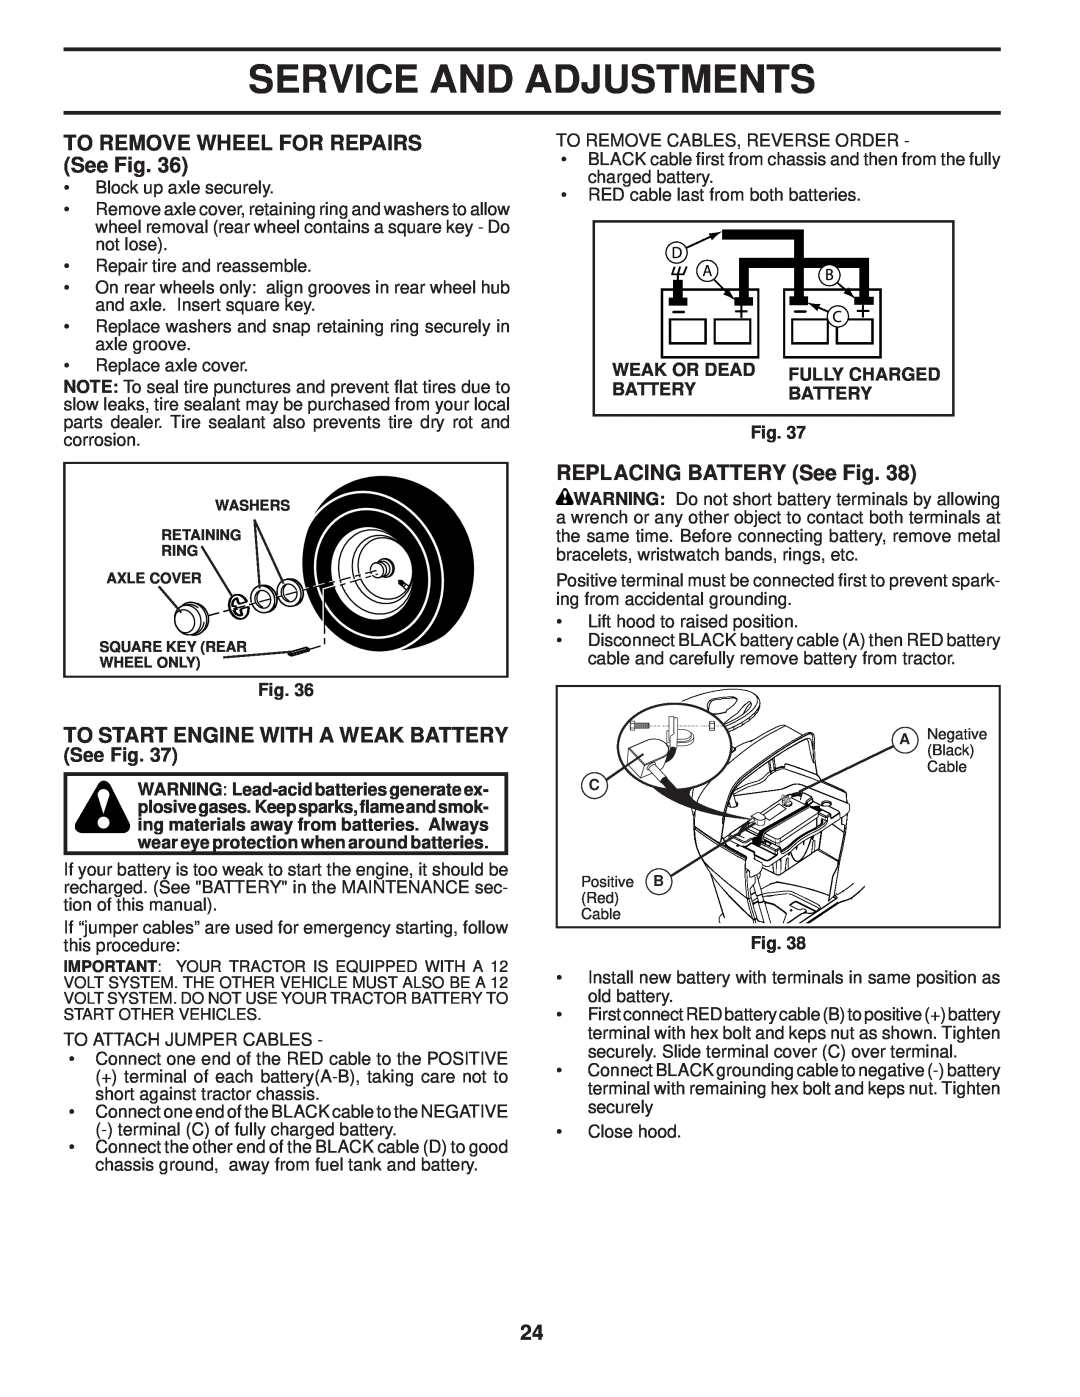 Husqvarna 96045001900 TO REMOVE WHEEL FOR REPAIRS See Fig, To Start Engine With A Weak Battery, REPLACING BATTERY See Fig 